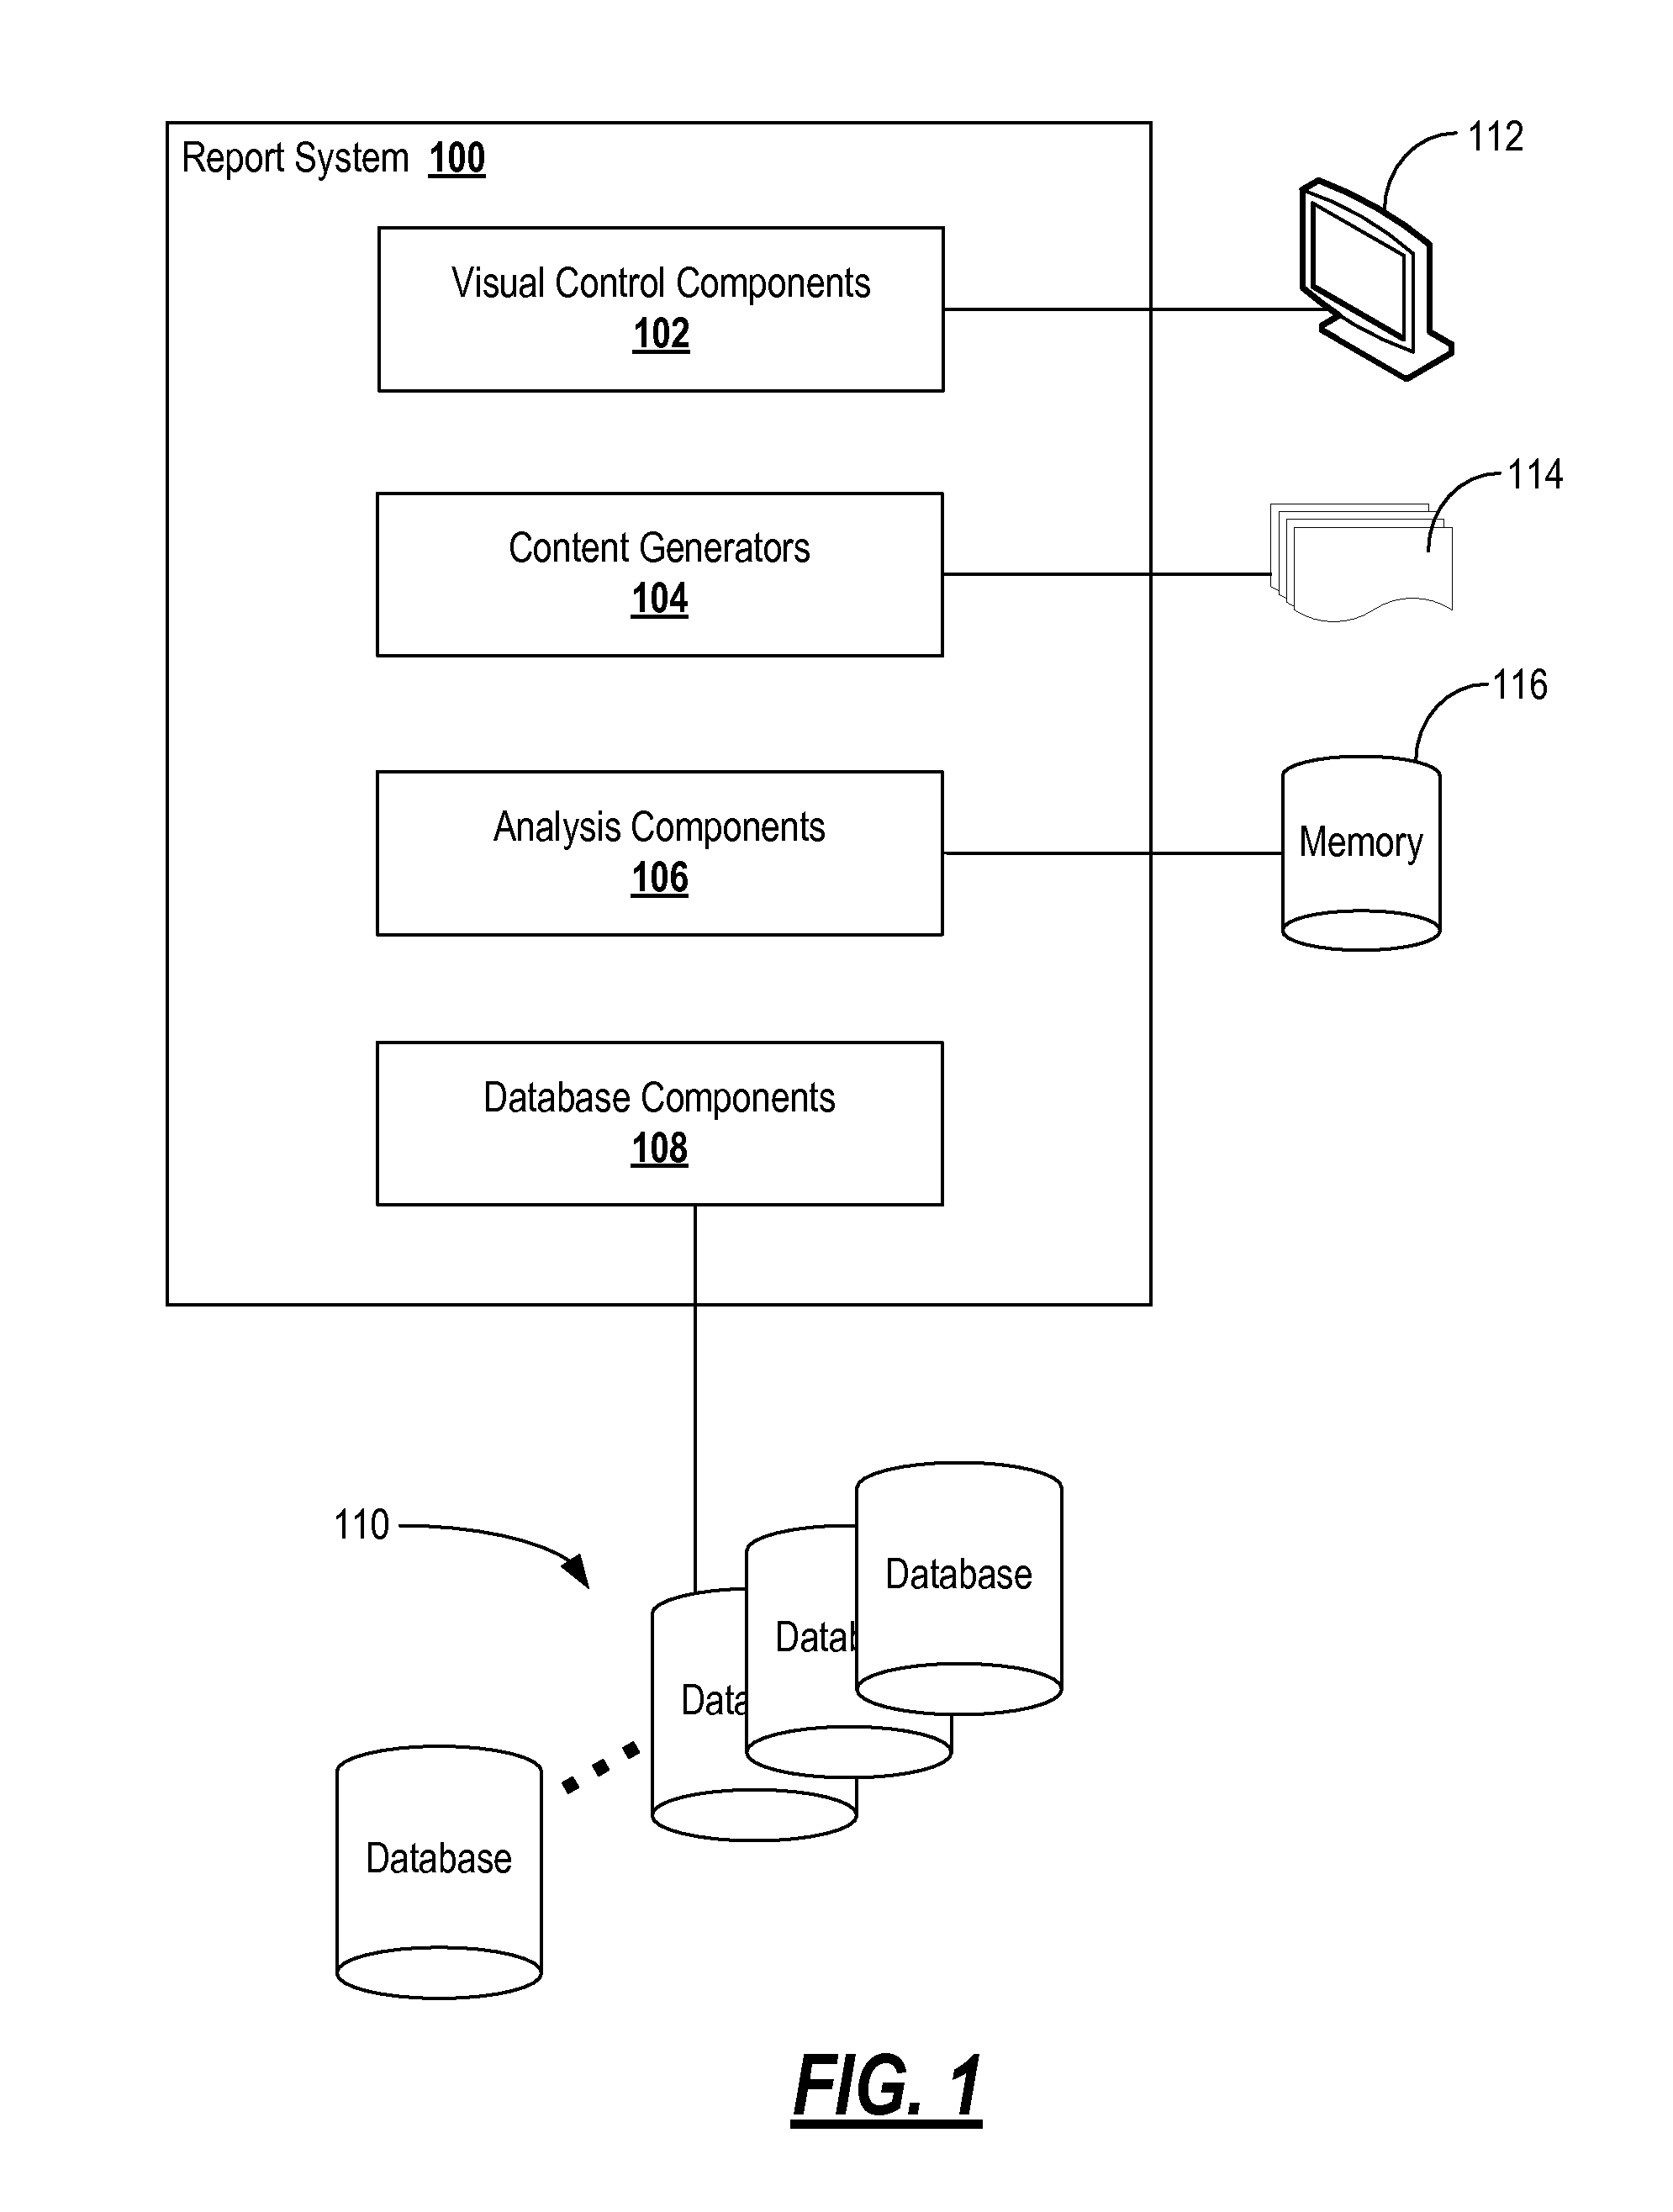 Systems and methods for interactively creating, customizing, and executing reports over the internet